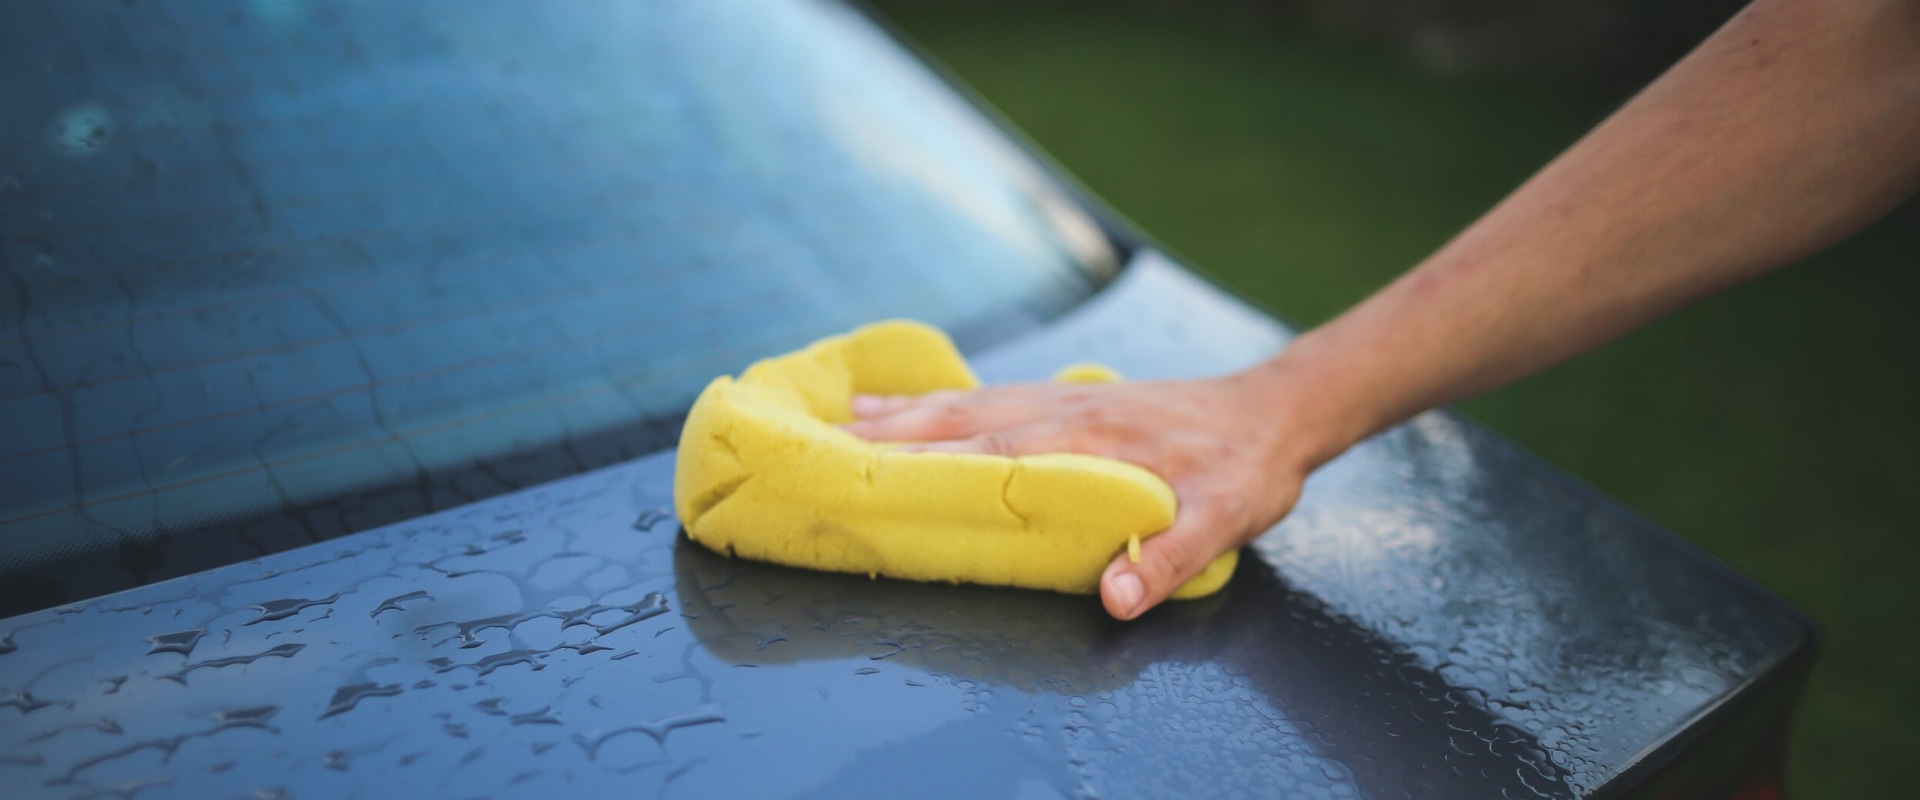 Is Professional Car Detailing Worth It?